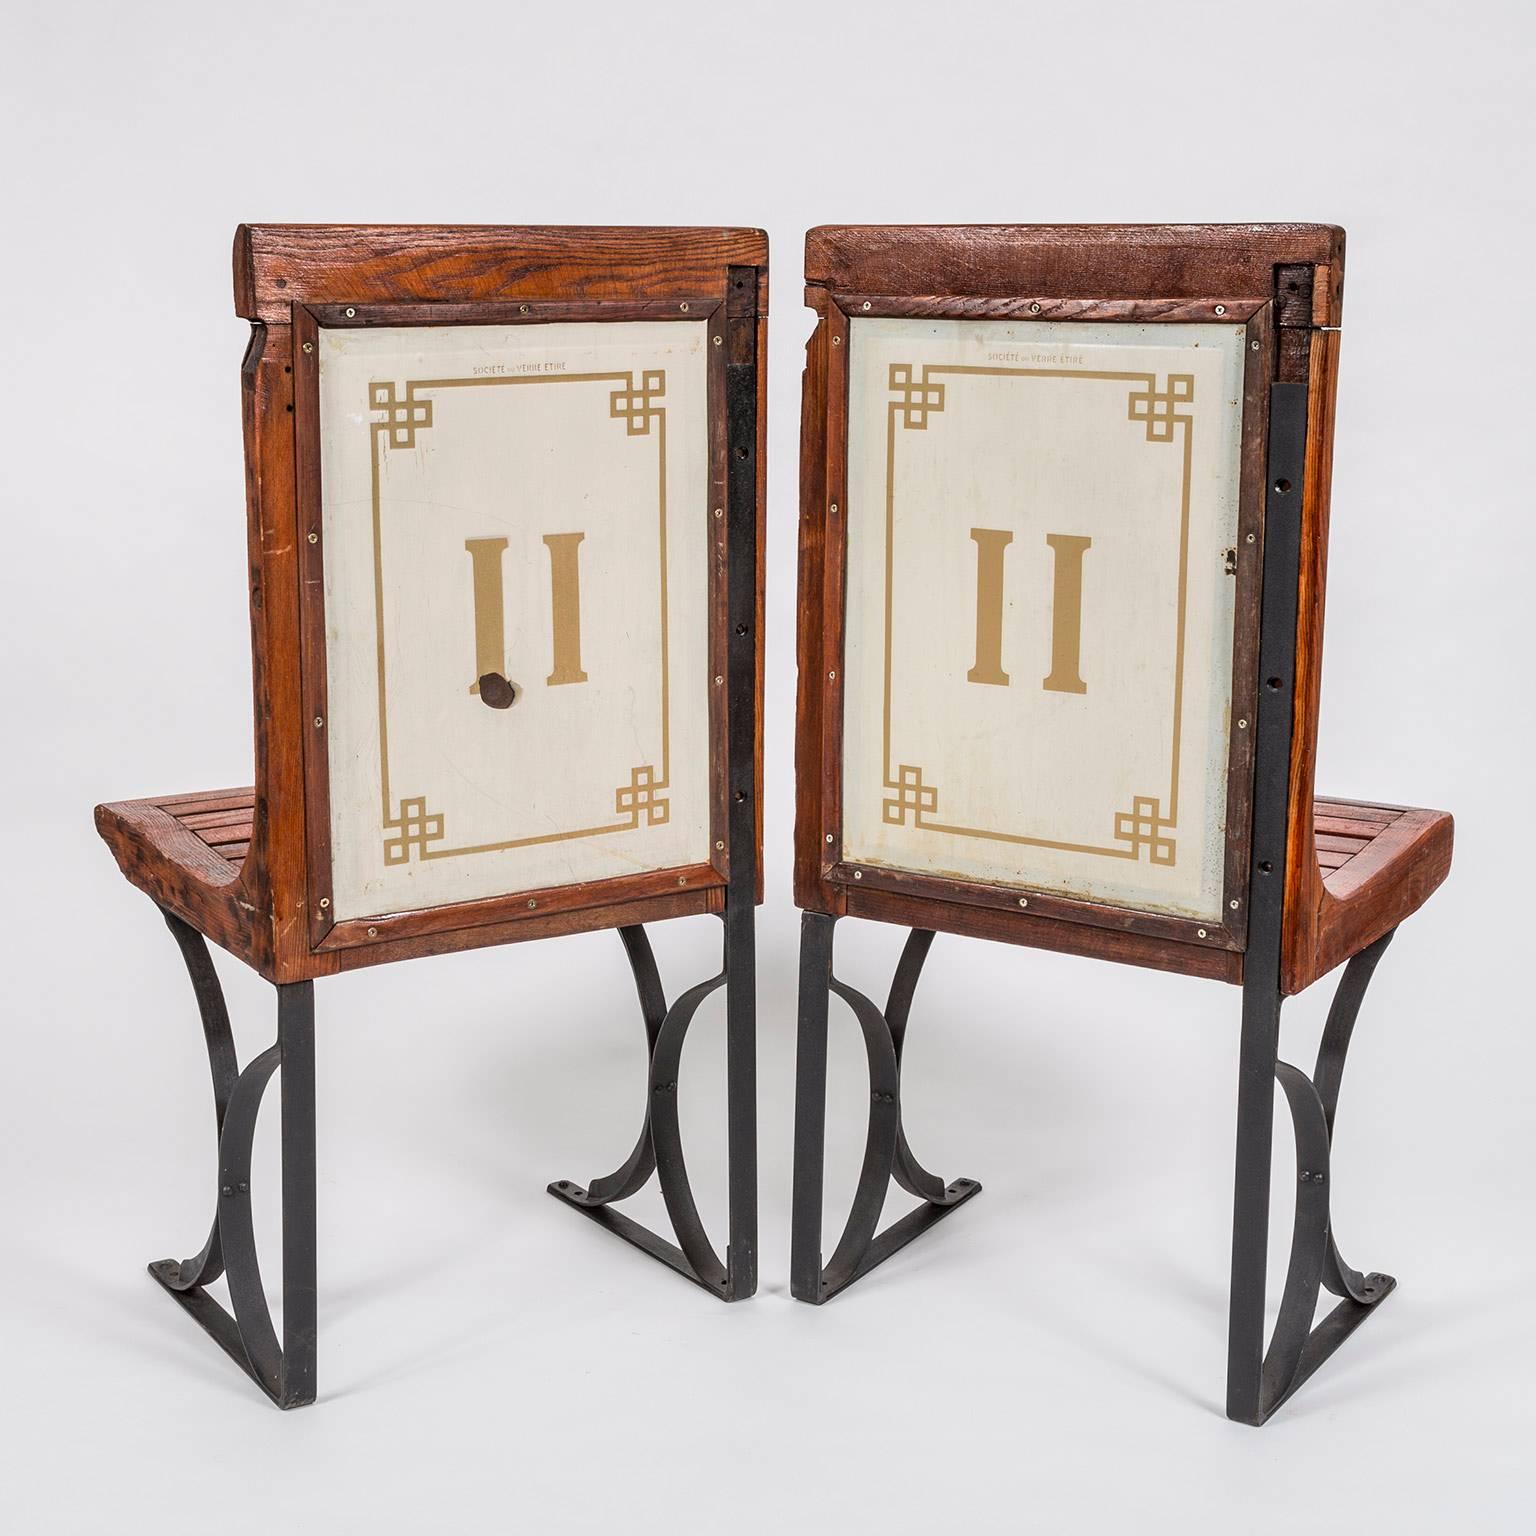 Pair of 1920s second class Paris Metro slatted wooden freestanding metro chairs with enamel backing inscribed 